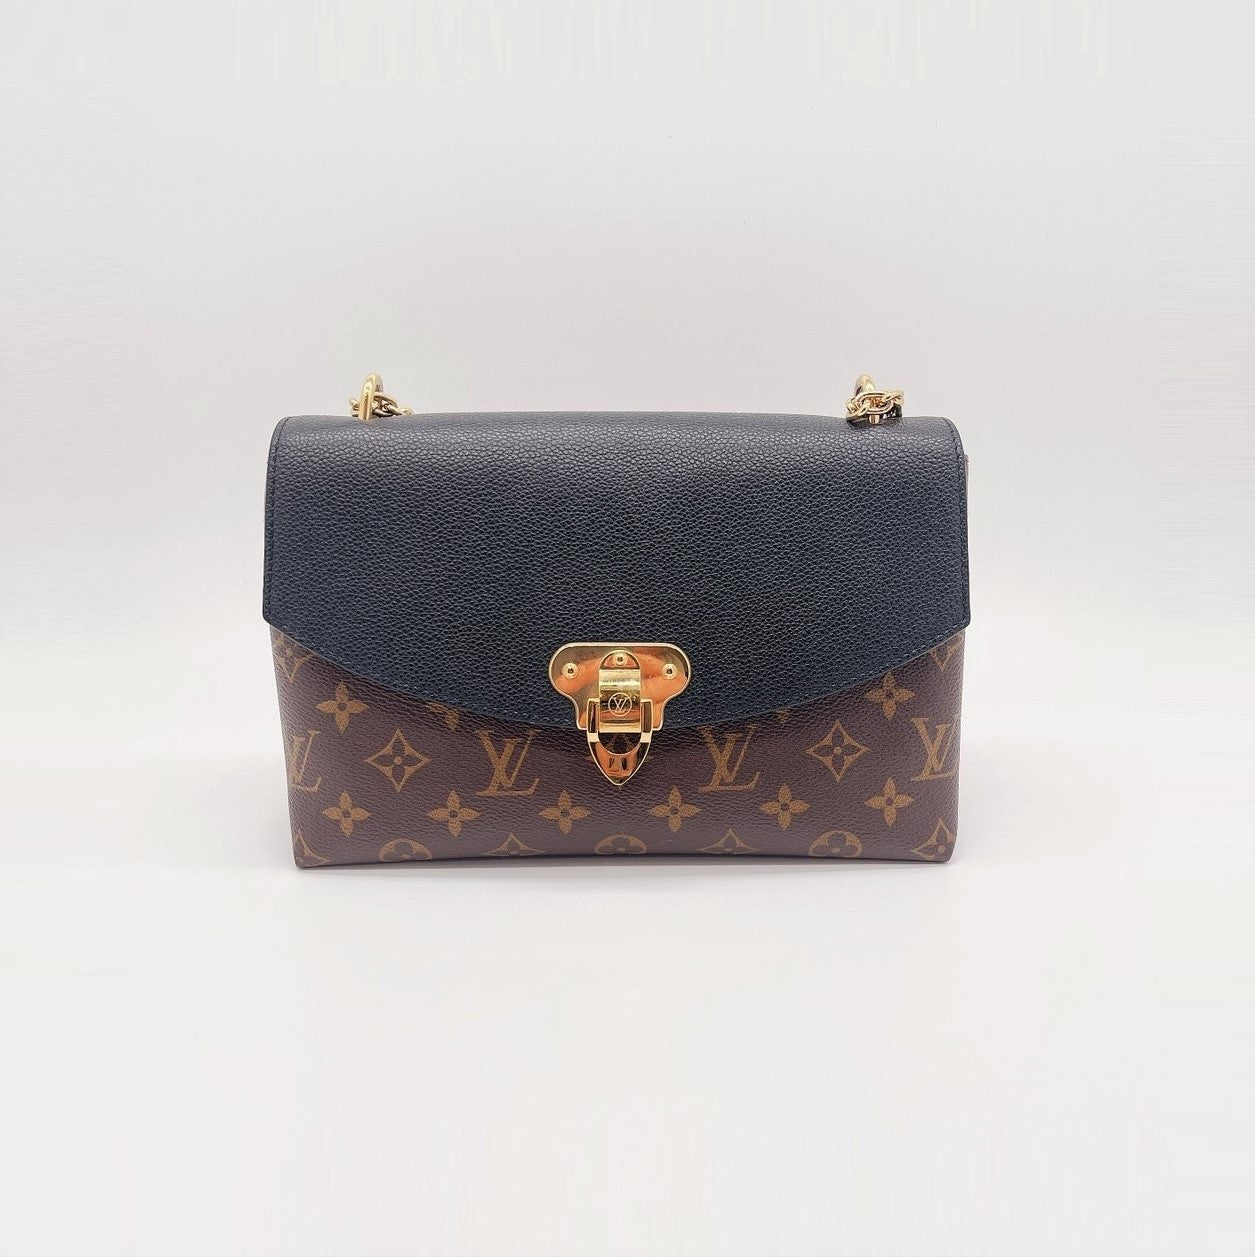 louis vuitton small black bag with chain